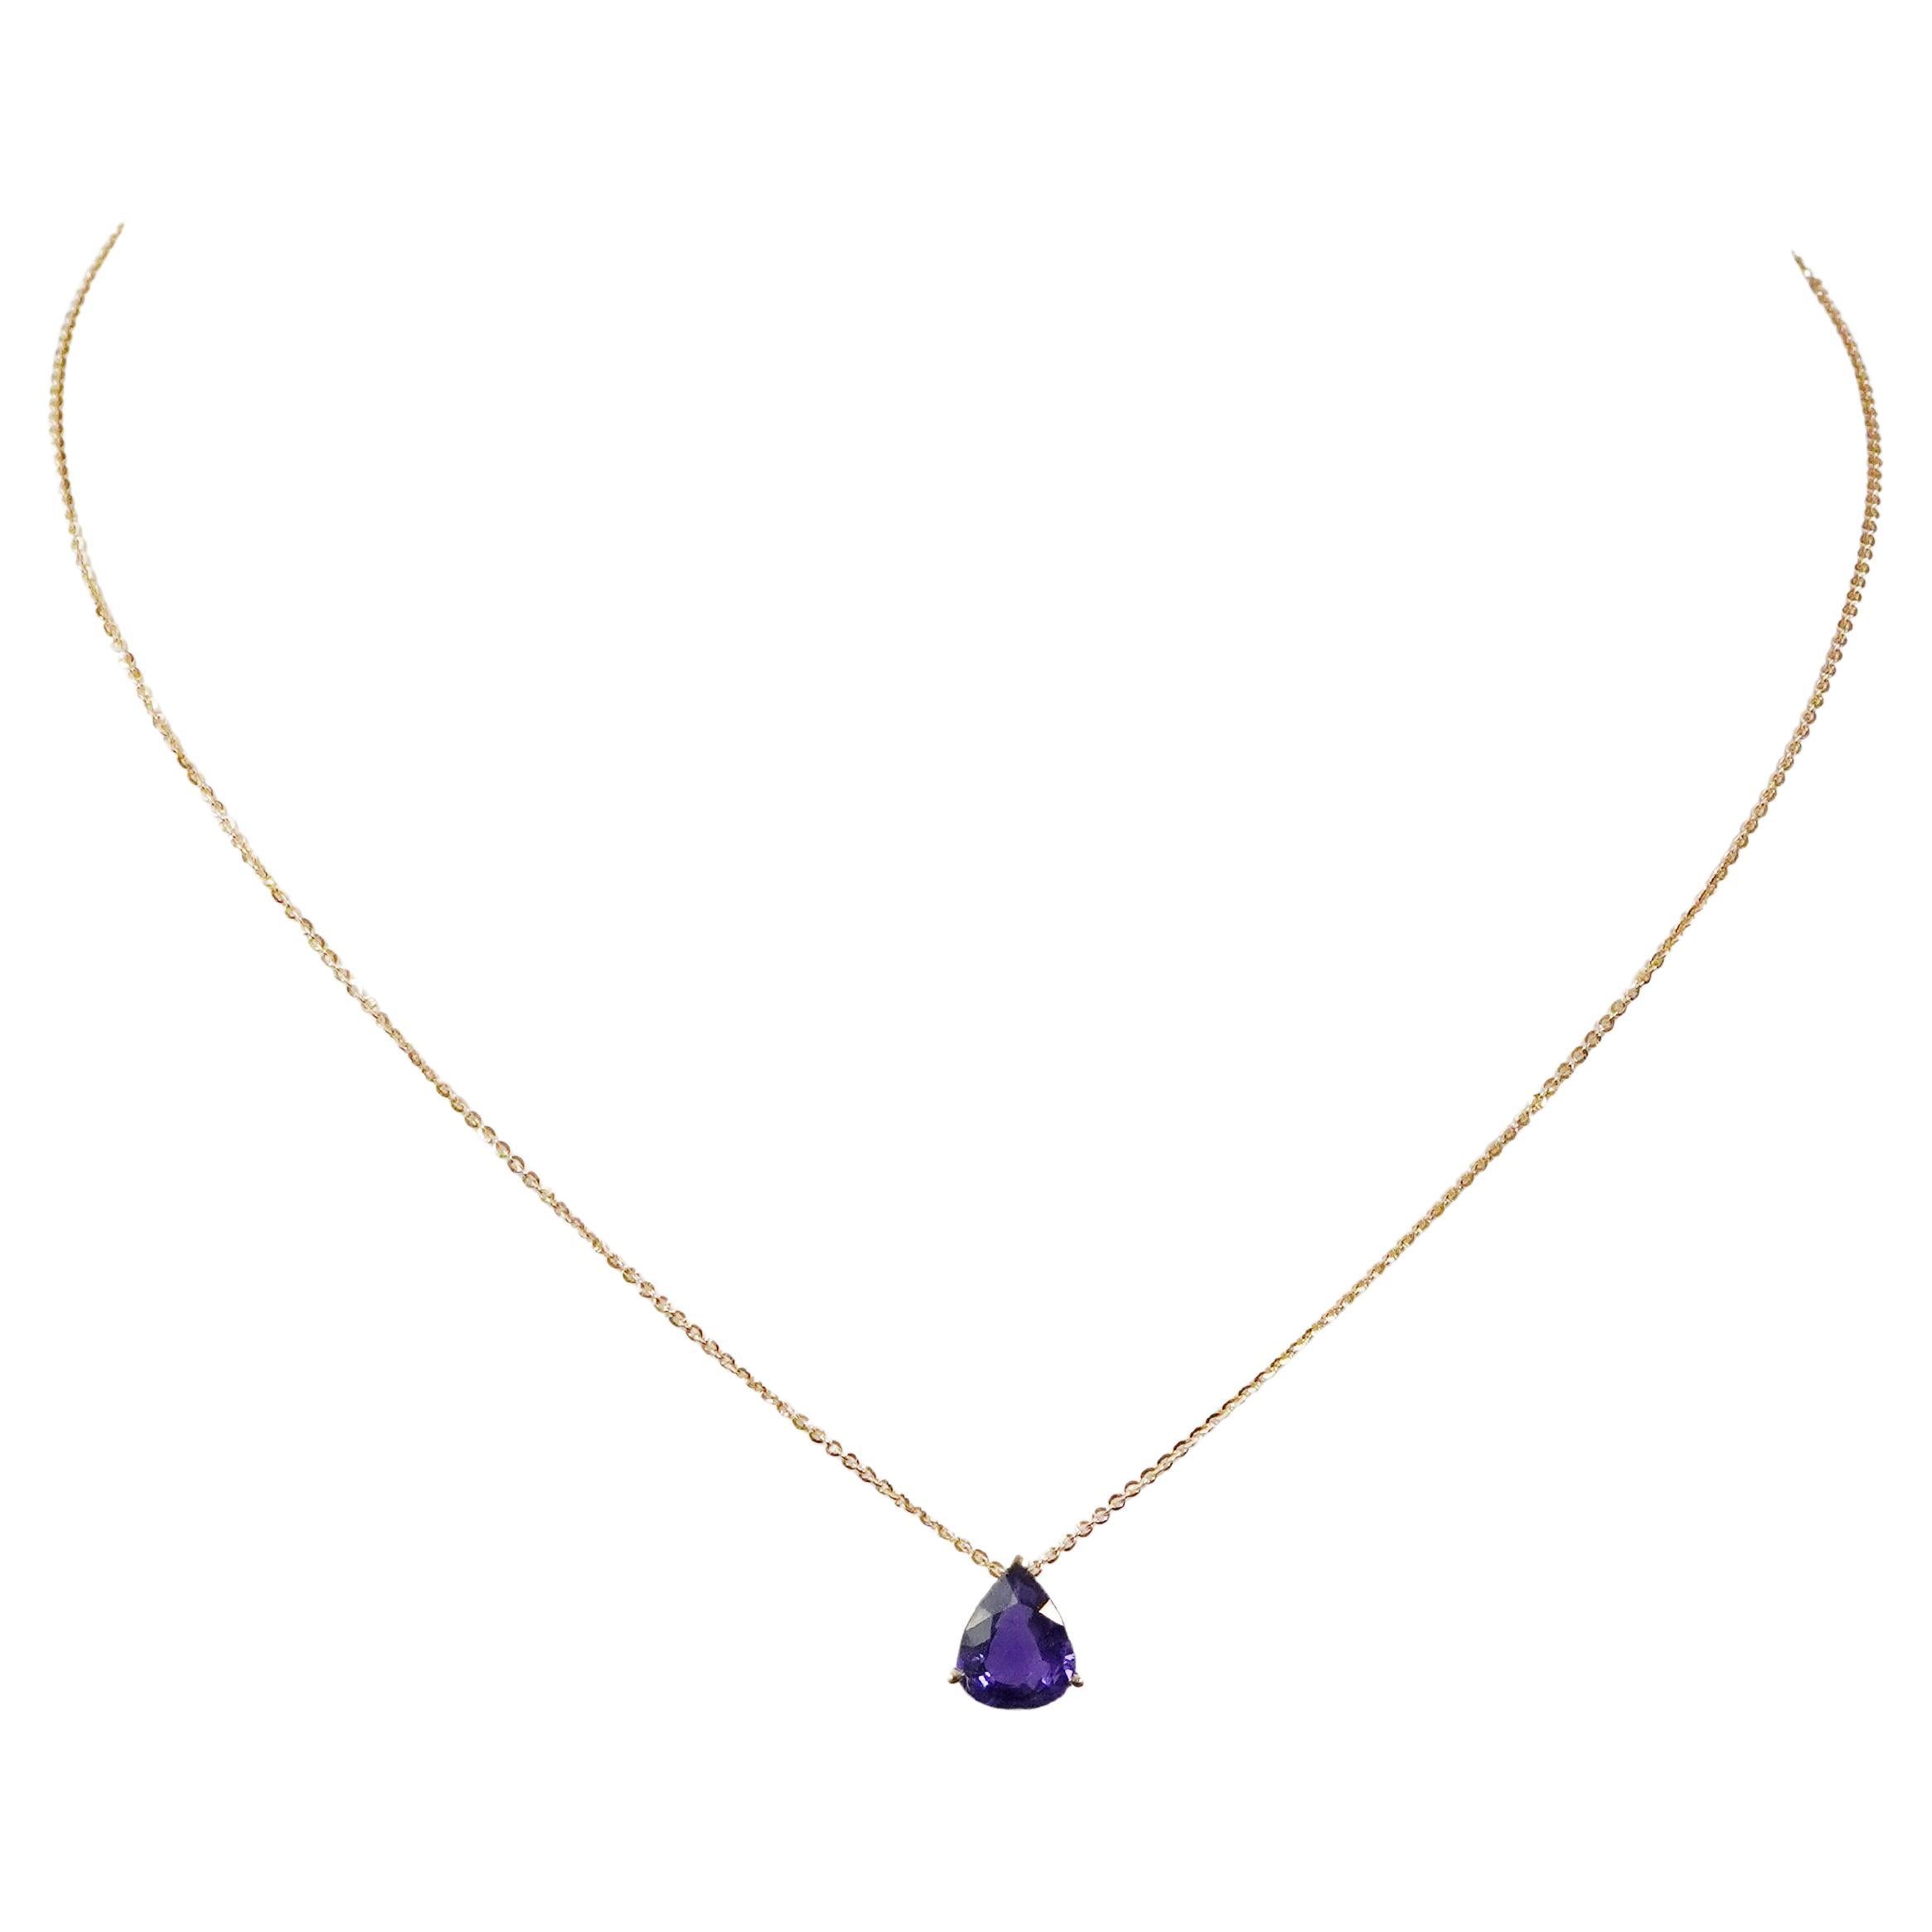 18K Yellow Gold Necklace With Sapphire 2.24 ct. For Sale